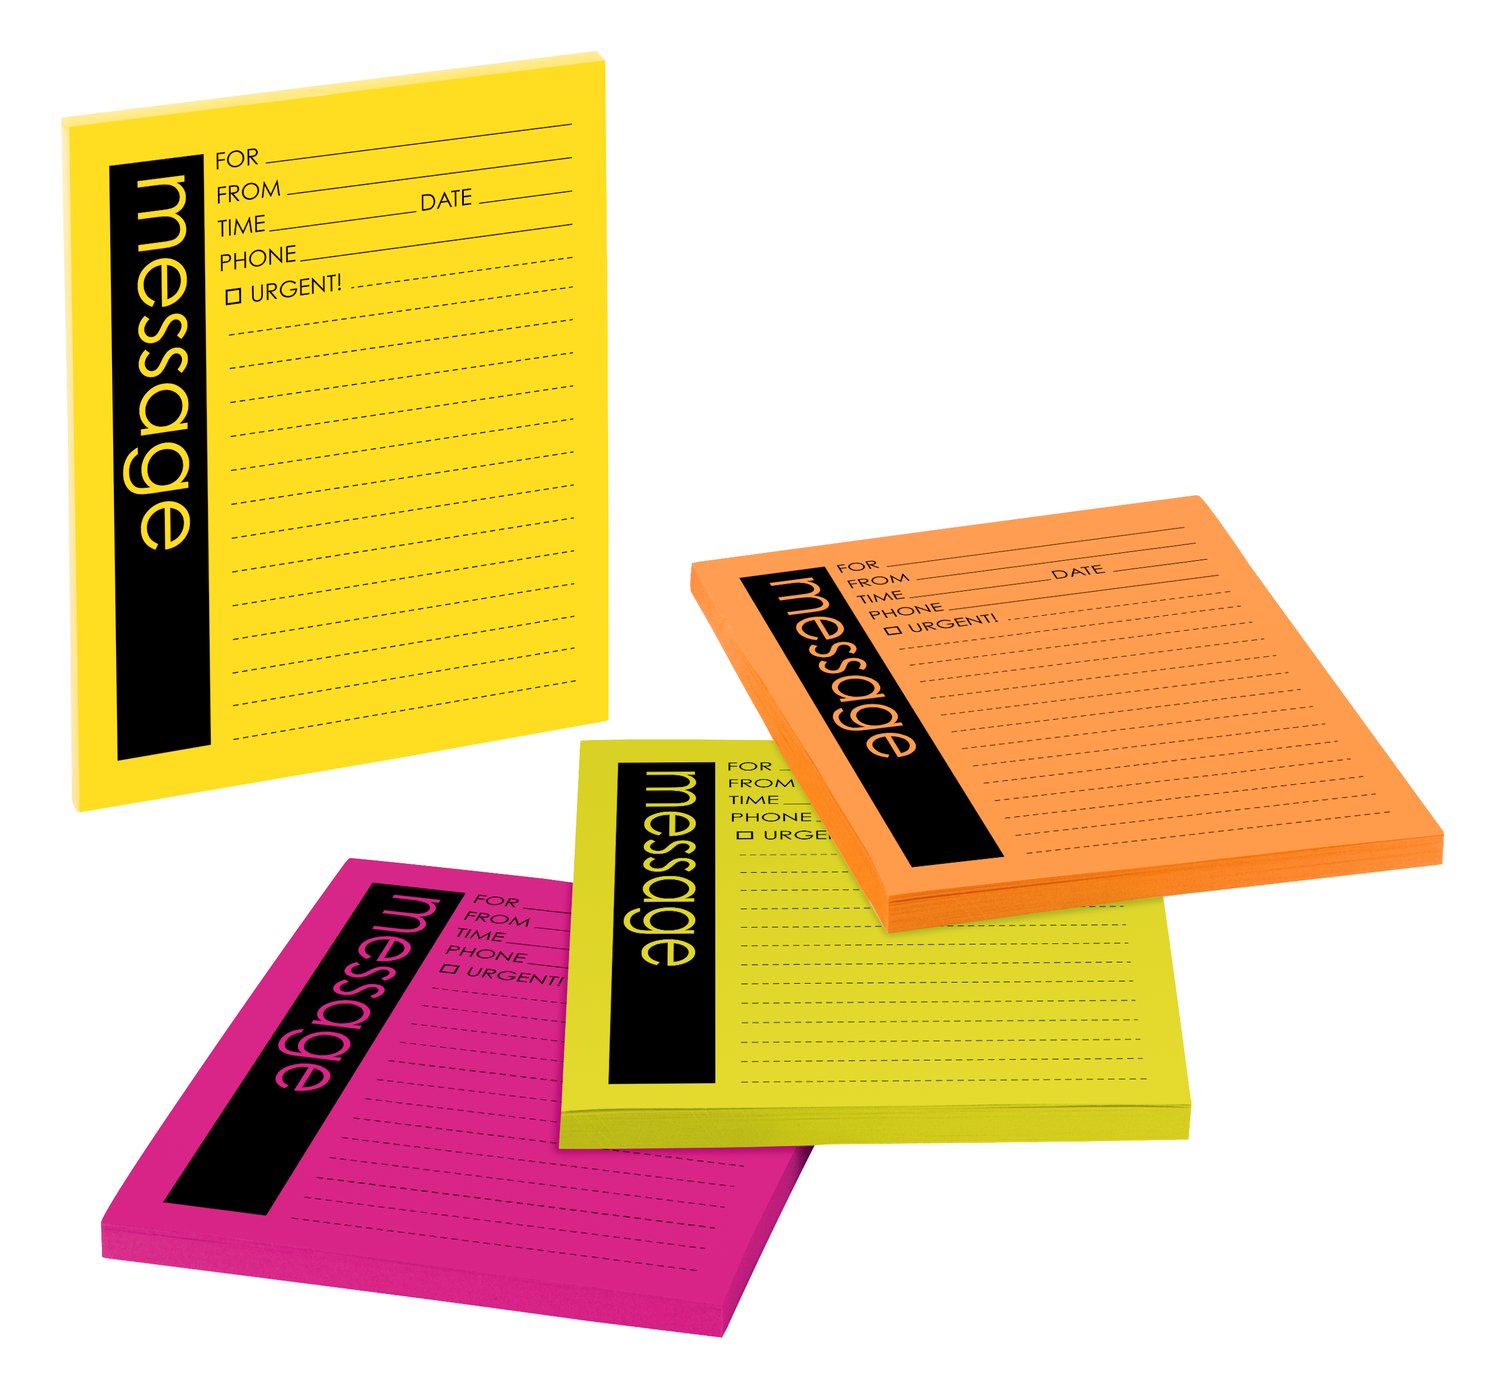 7010299862 - Post-it Printed Notes 7679-4-SS, 4 in x 5 in, Assorted Bright Colors,
Lined, 4 Pads/Pack